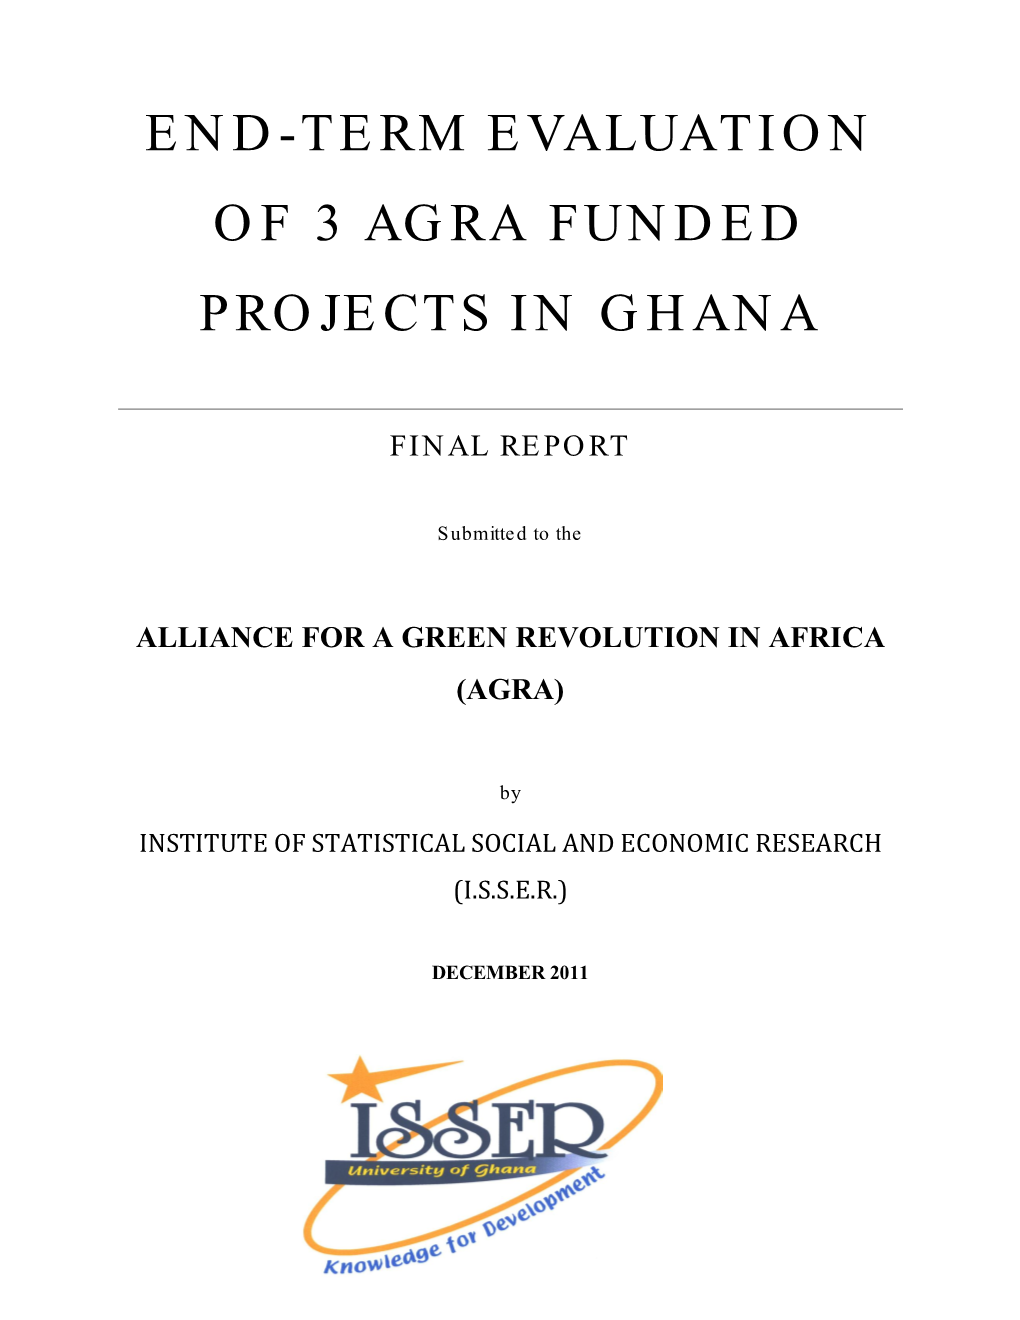 End-Term Evaluation of 3 Agra Funded Projects in Ghana